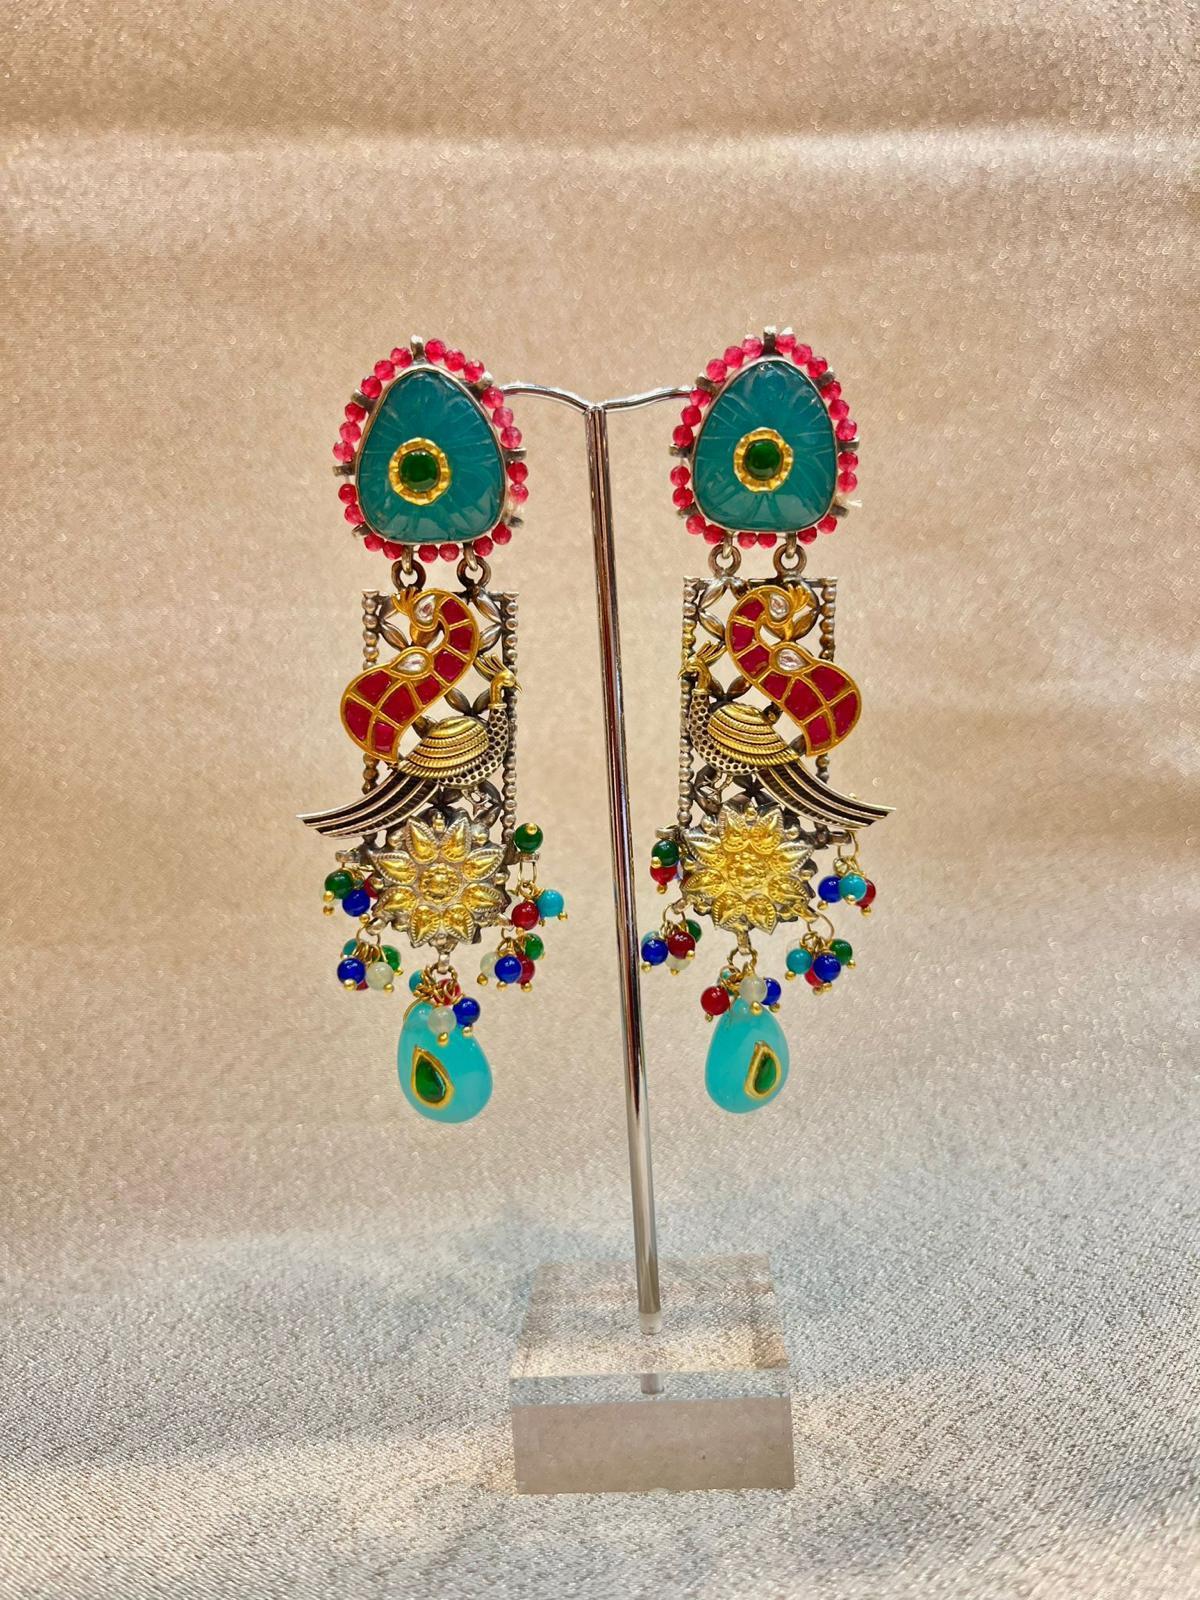 Bochic “IndoChina” Oriental Vintage Silver & Enamel Blue, Red Bird Earrings 
Turquoise
Rose cut Diamonds 
Rubies
Emeralds 
Sapphires 

The earrings from the 